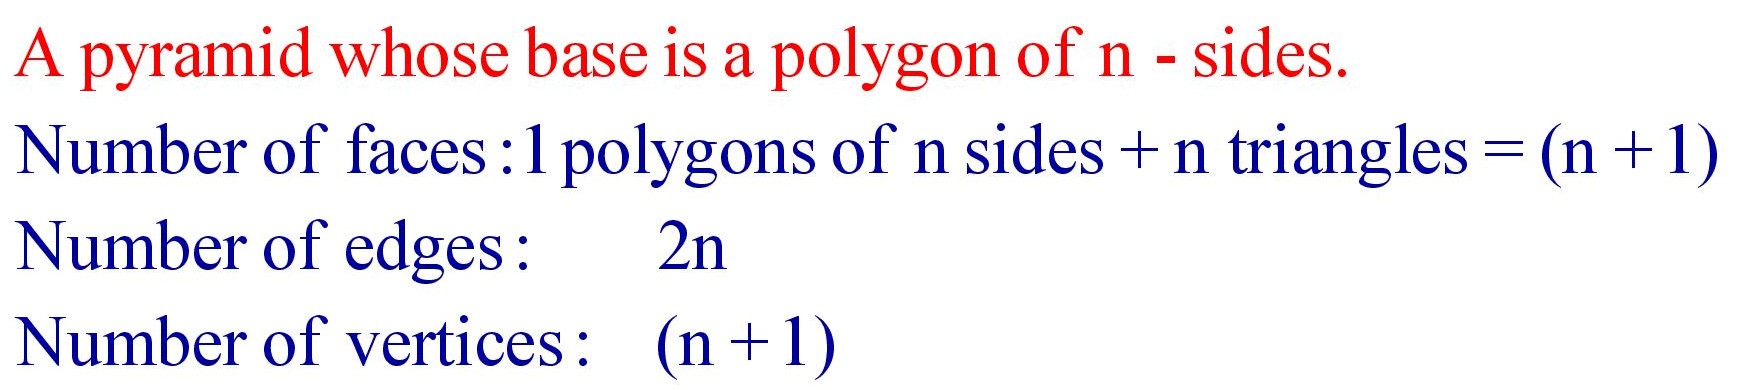 A pyramid whose base is a polygon of n - sides